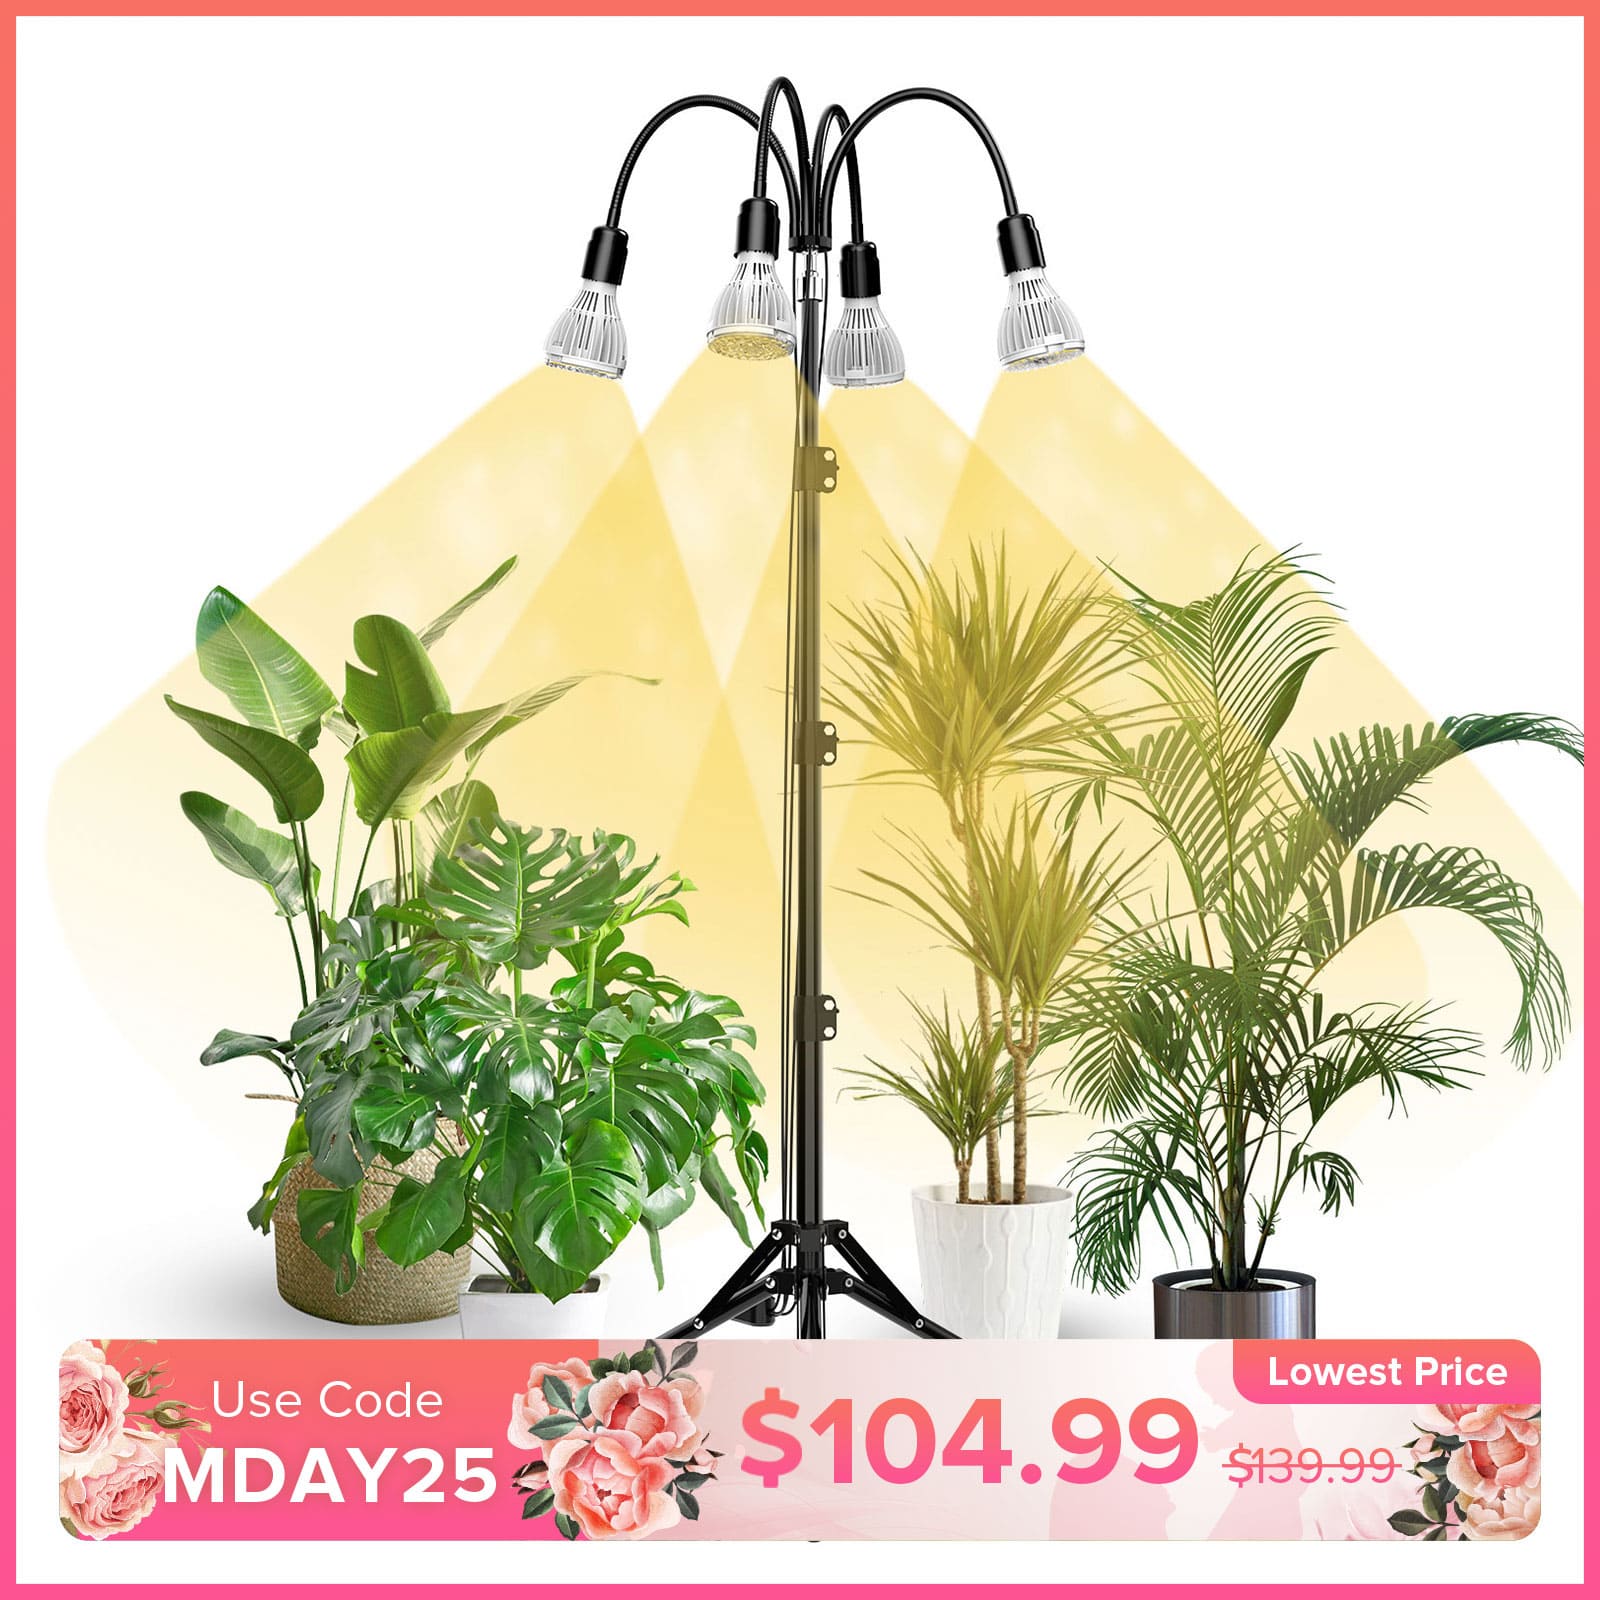 90W/120W Grow Light with Adjustable Tripod Stand (US ONLY)